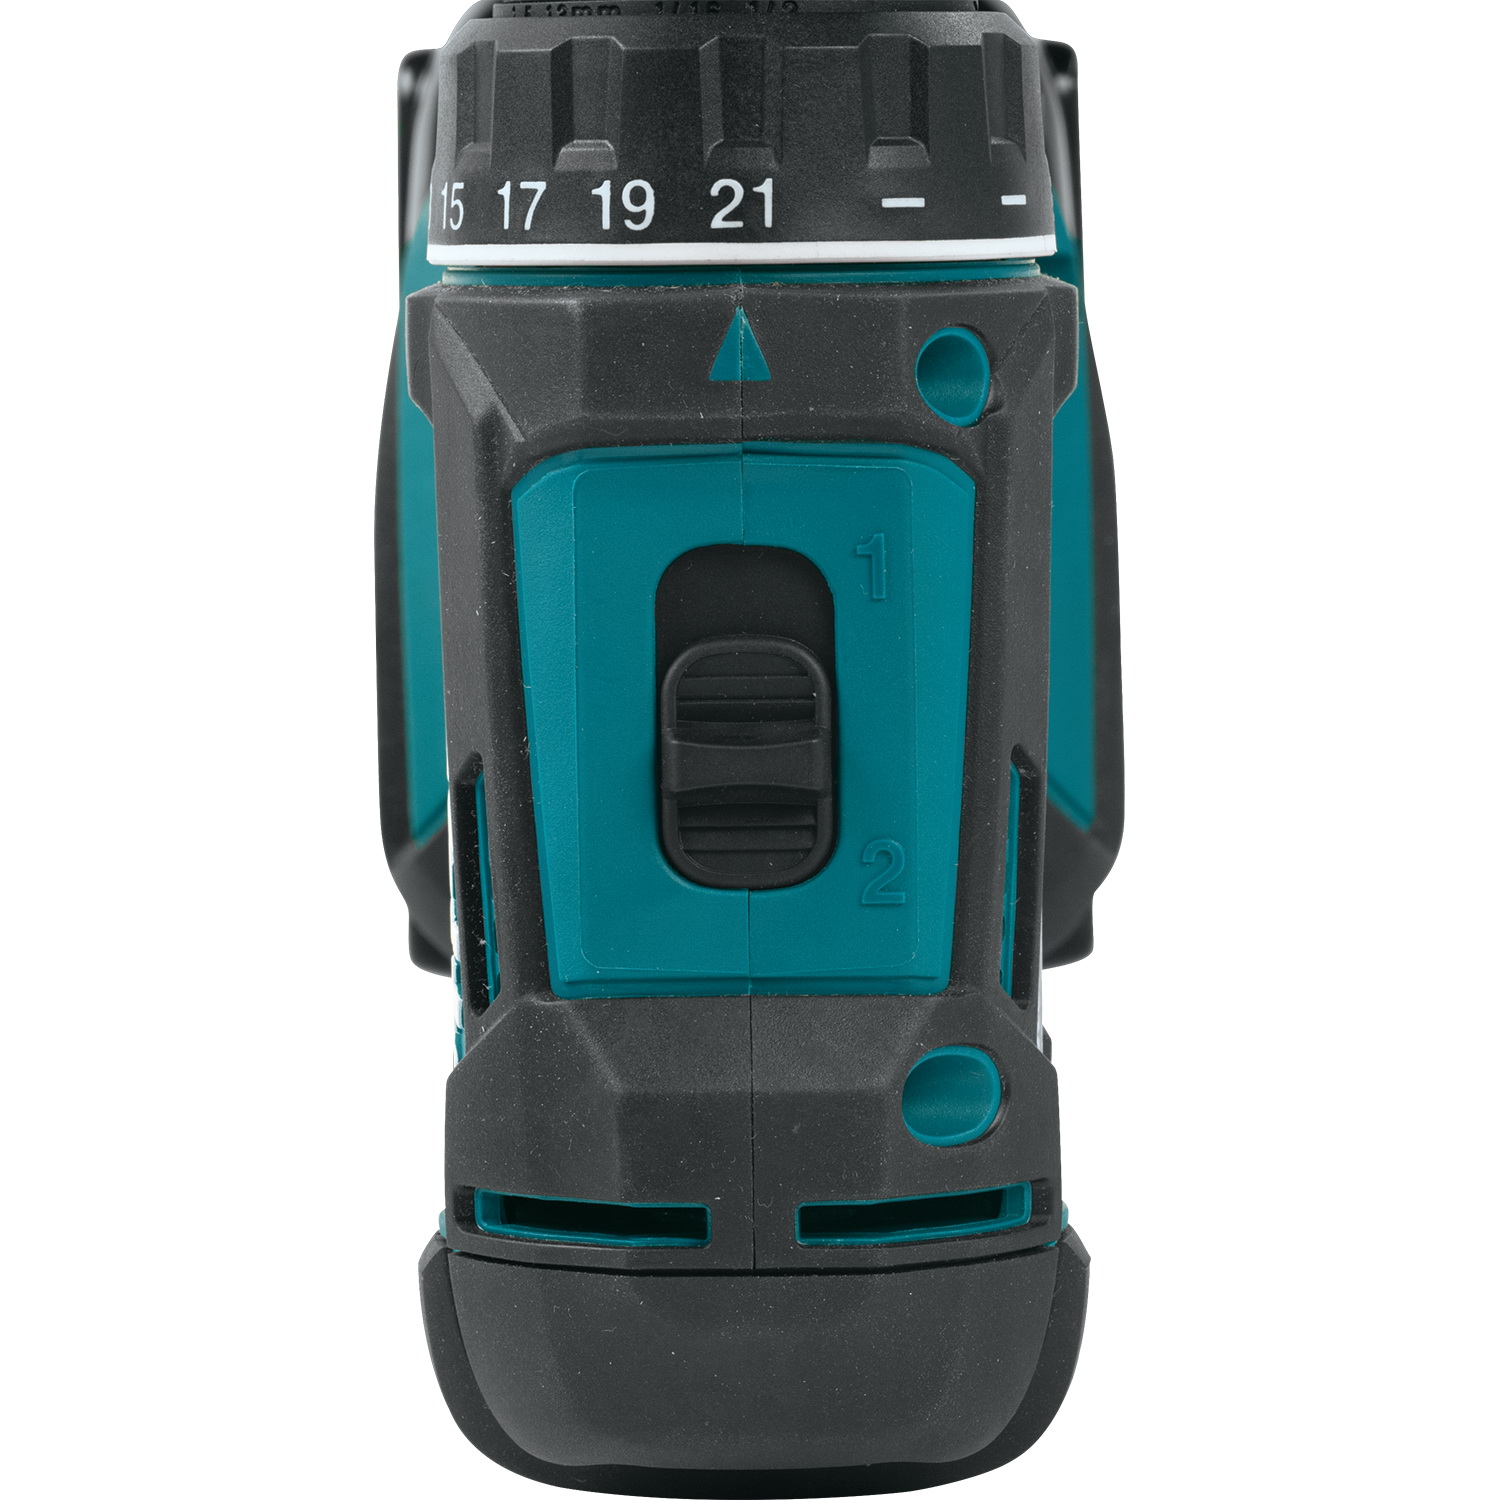 Makita LXT Series XFD10Z Drill Driver, Tool Only, 18 V, 1/2 in Chuck, Ratcheting Chuck - 3